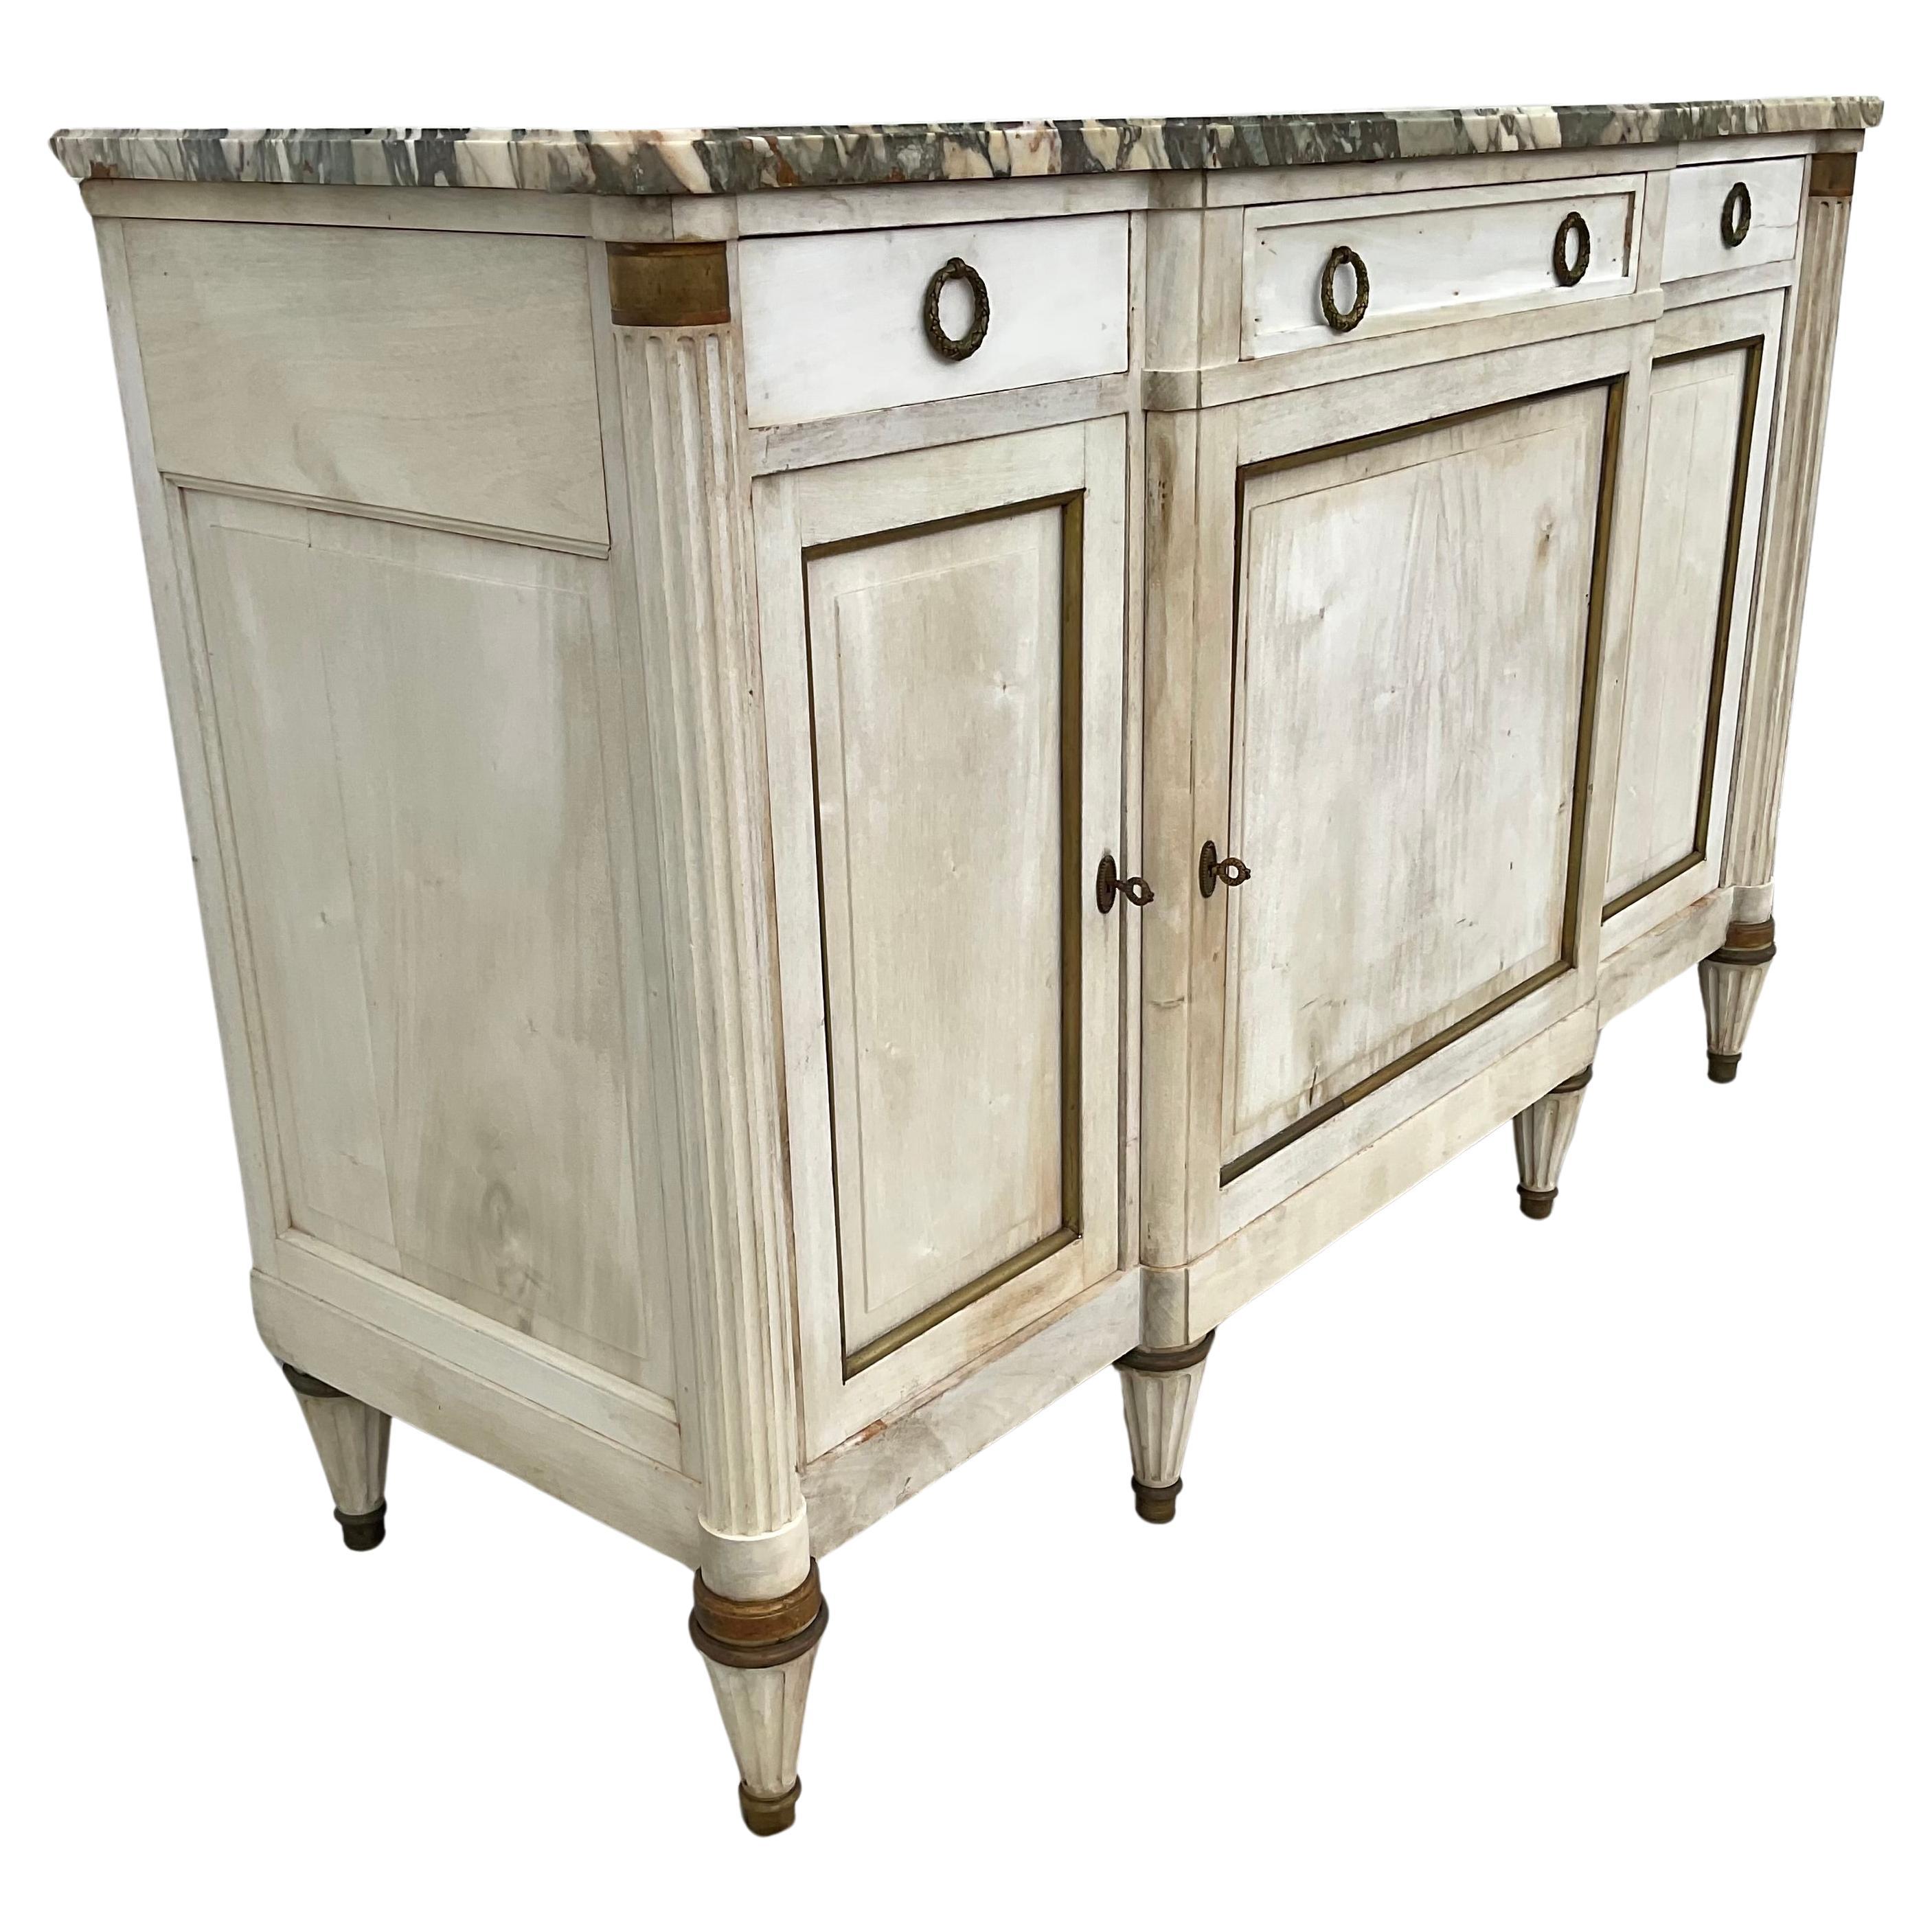 Antique French Louis XVI style enfilade from Provence, circa 1920s. Handcrafted of solid cherry with a bleached finish, this handsome French buffet with it's straight lines and lovely patina provides excellent storage and a great surface for serving